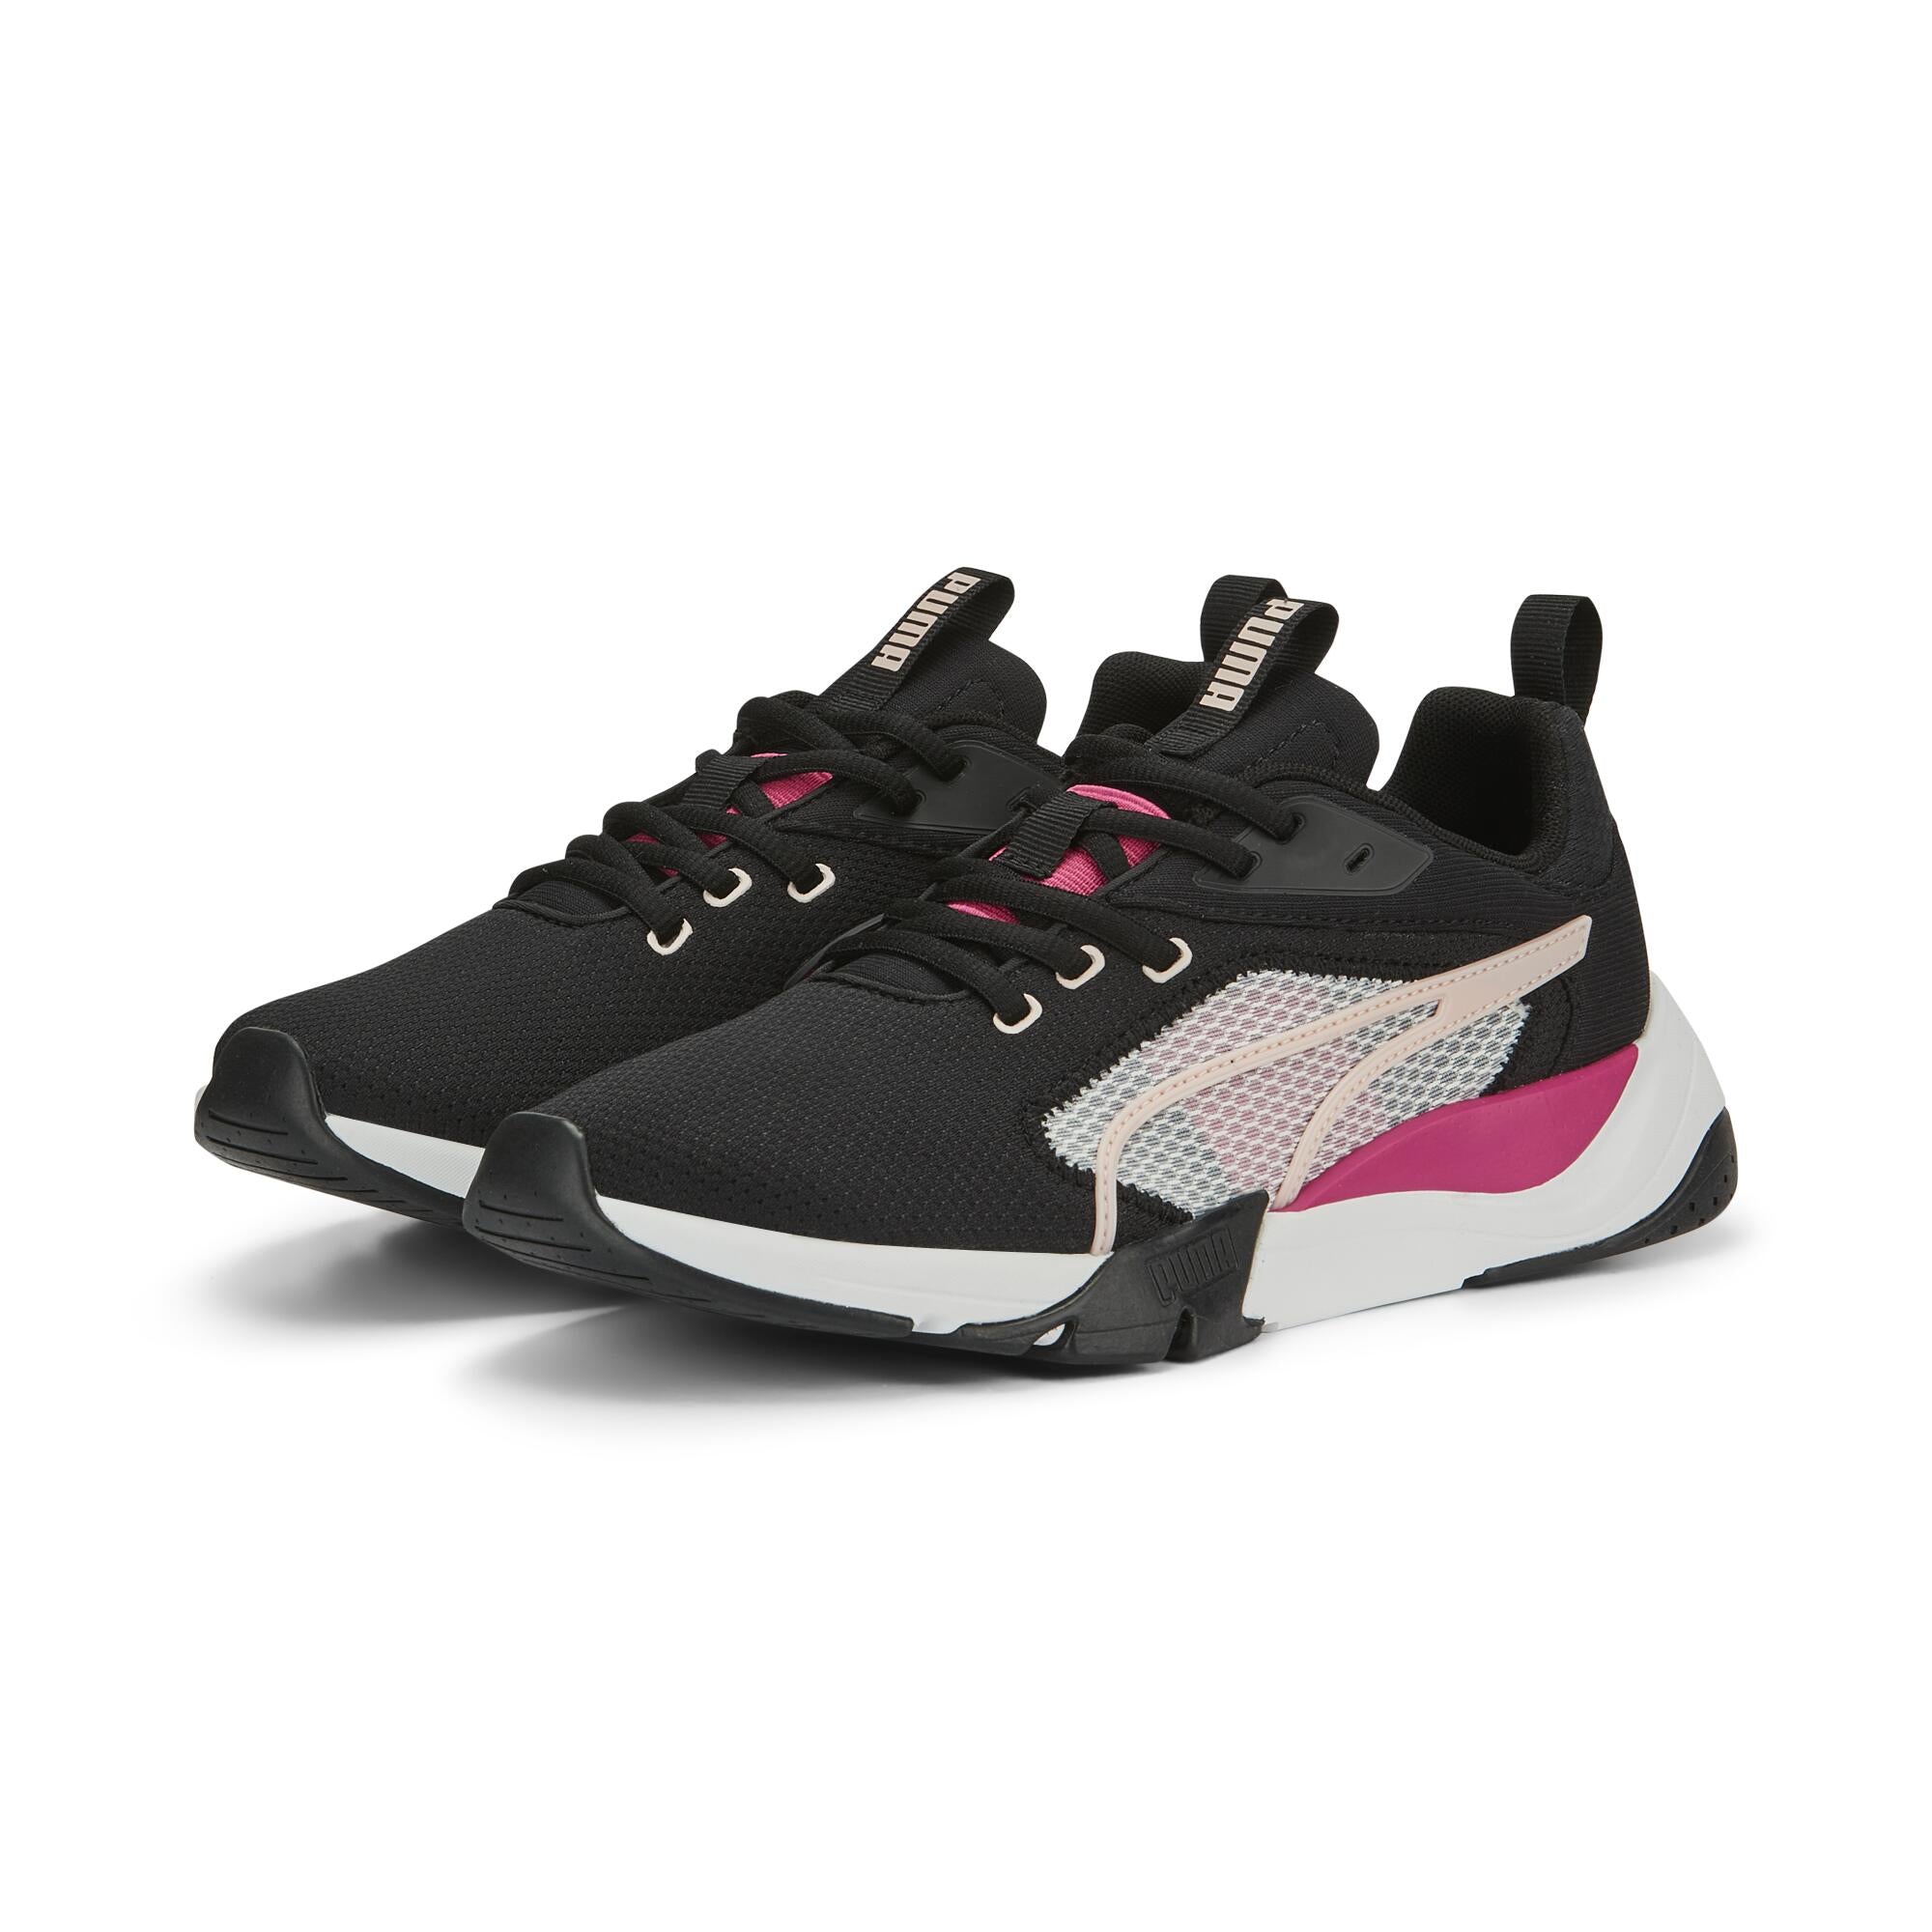 Woman's Sneakers & Athletic Shoes PUMA Zora